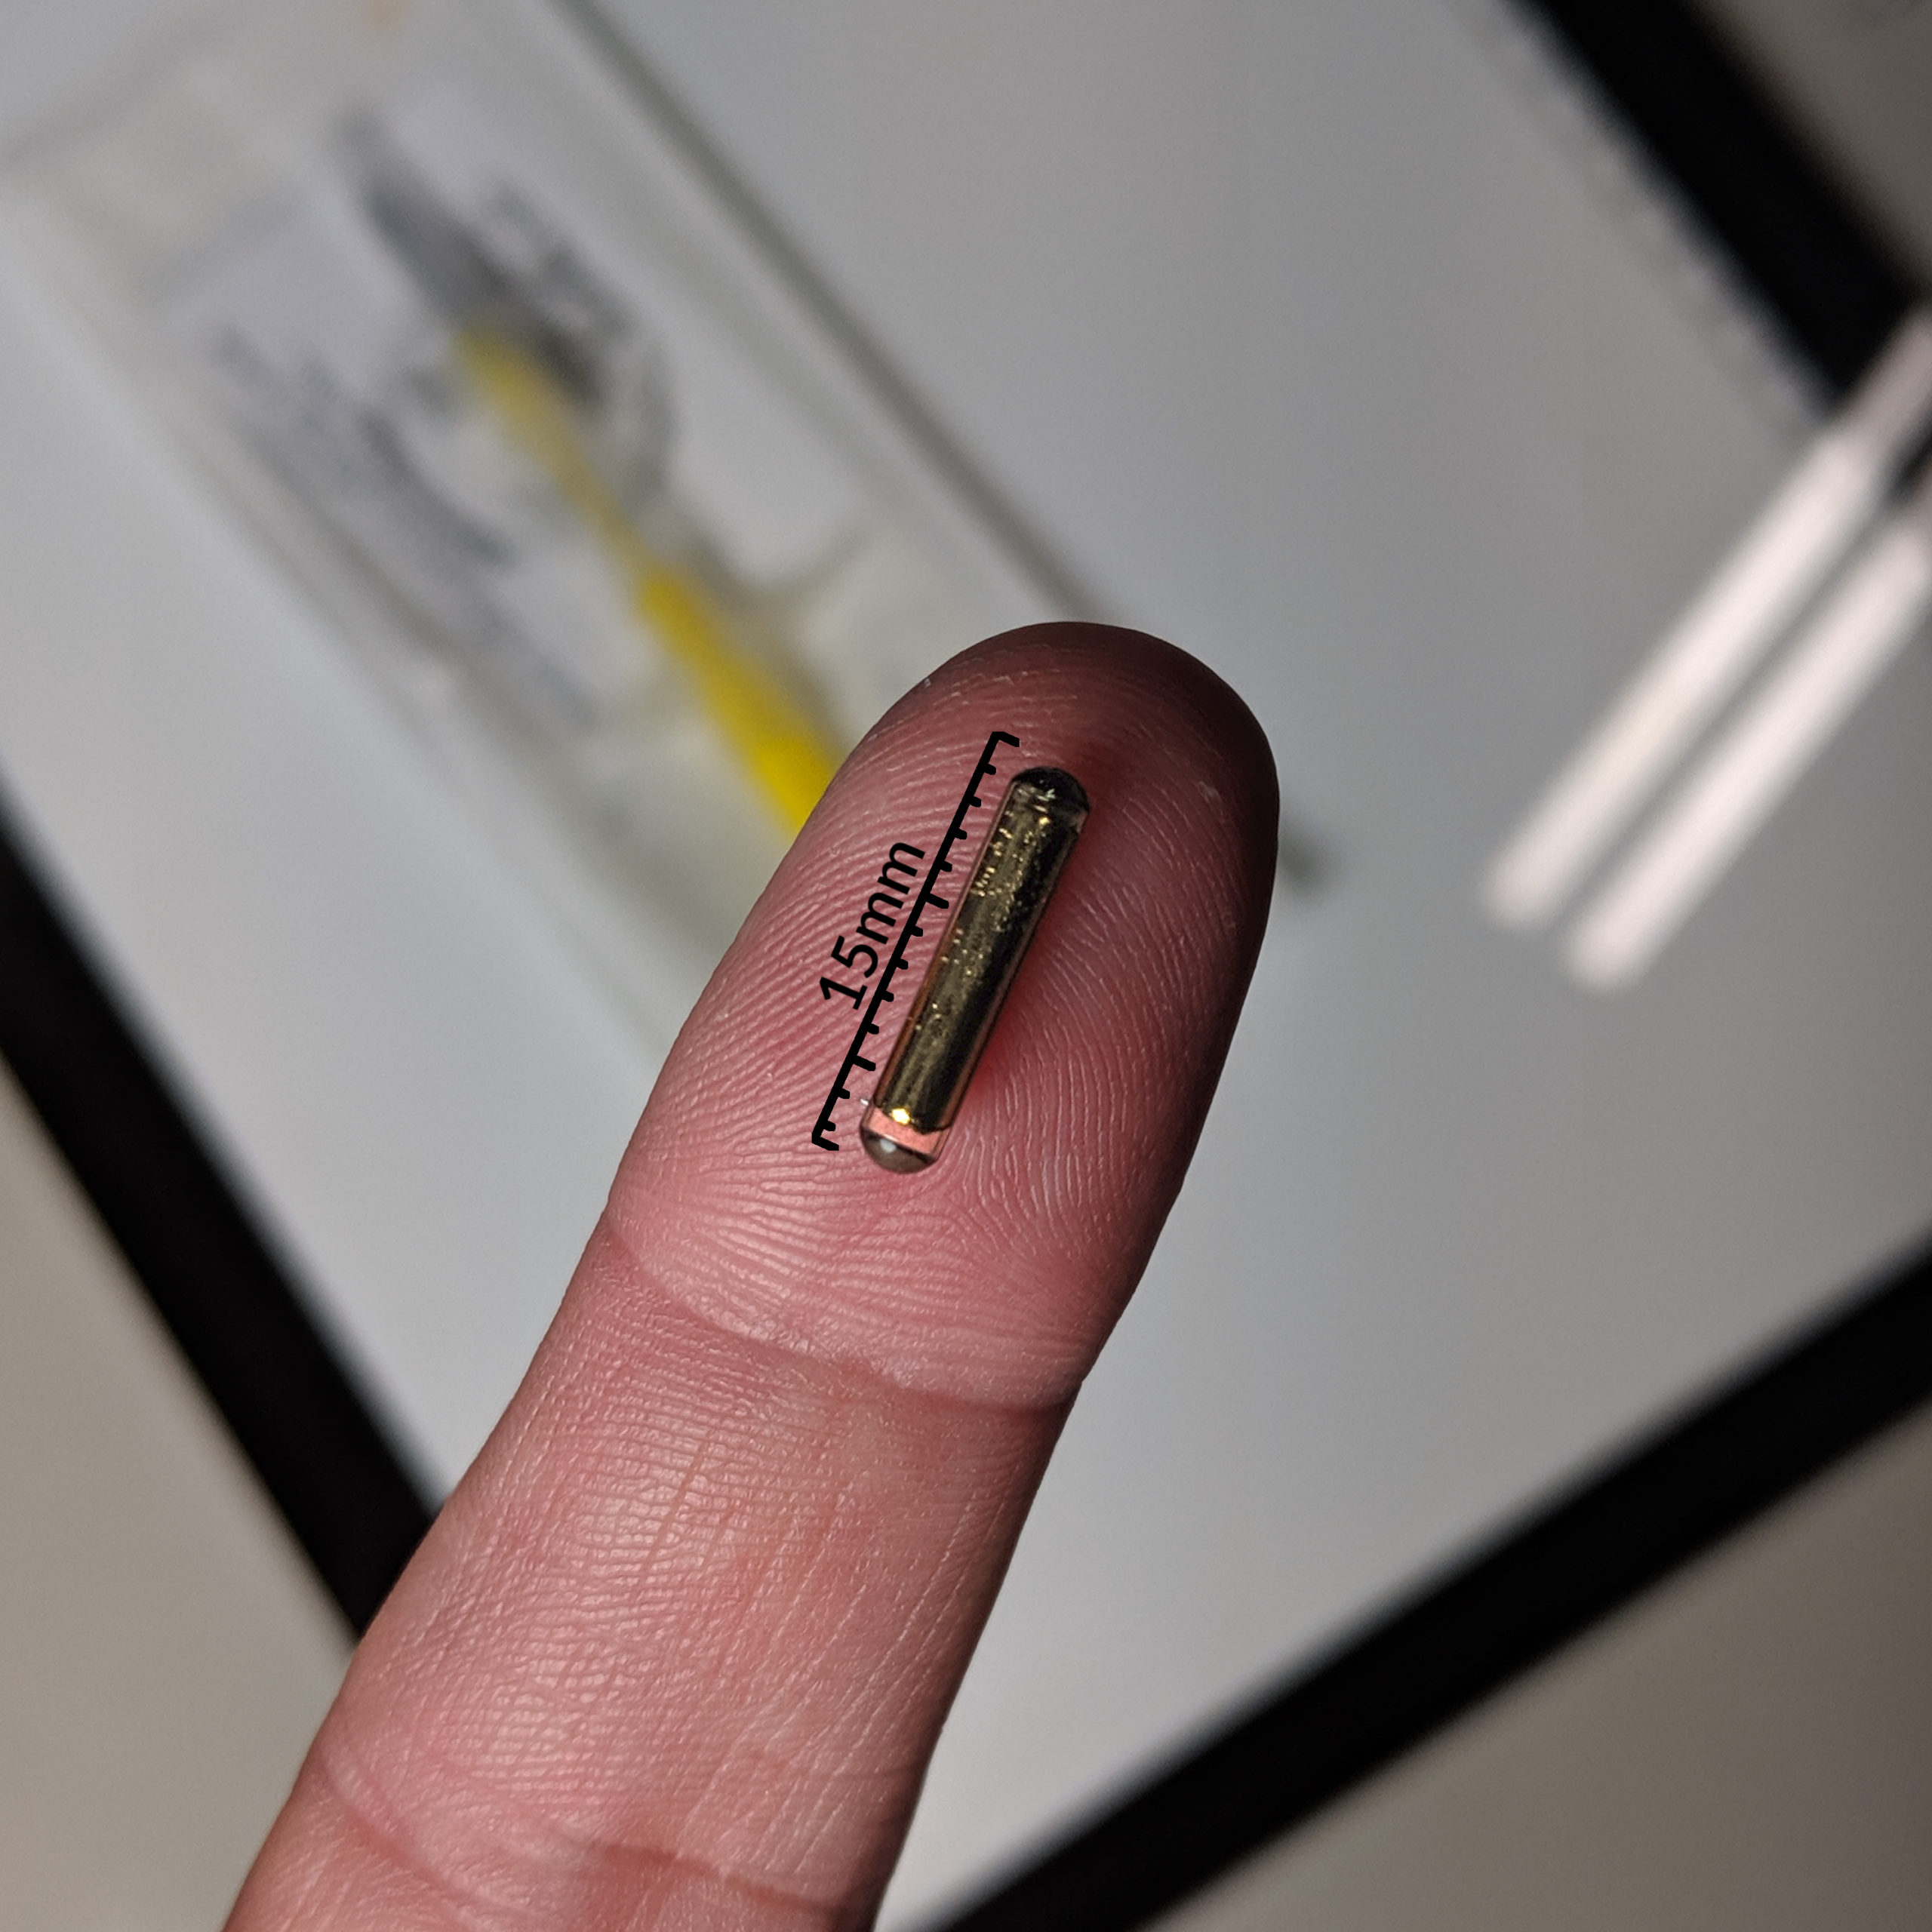 xG3 Injectable - RFID & NFC Chip Implants and Biohacking products